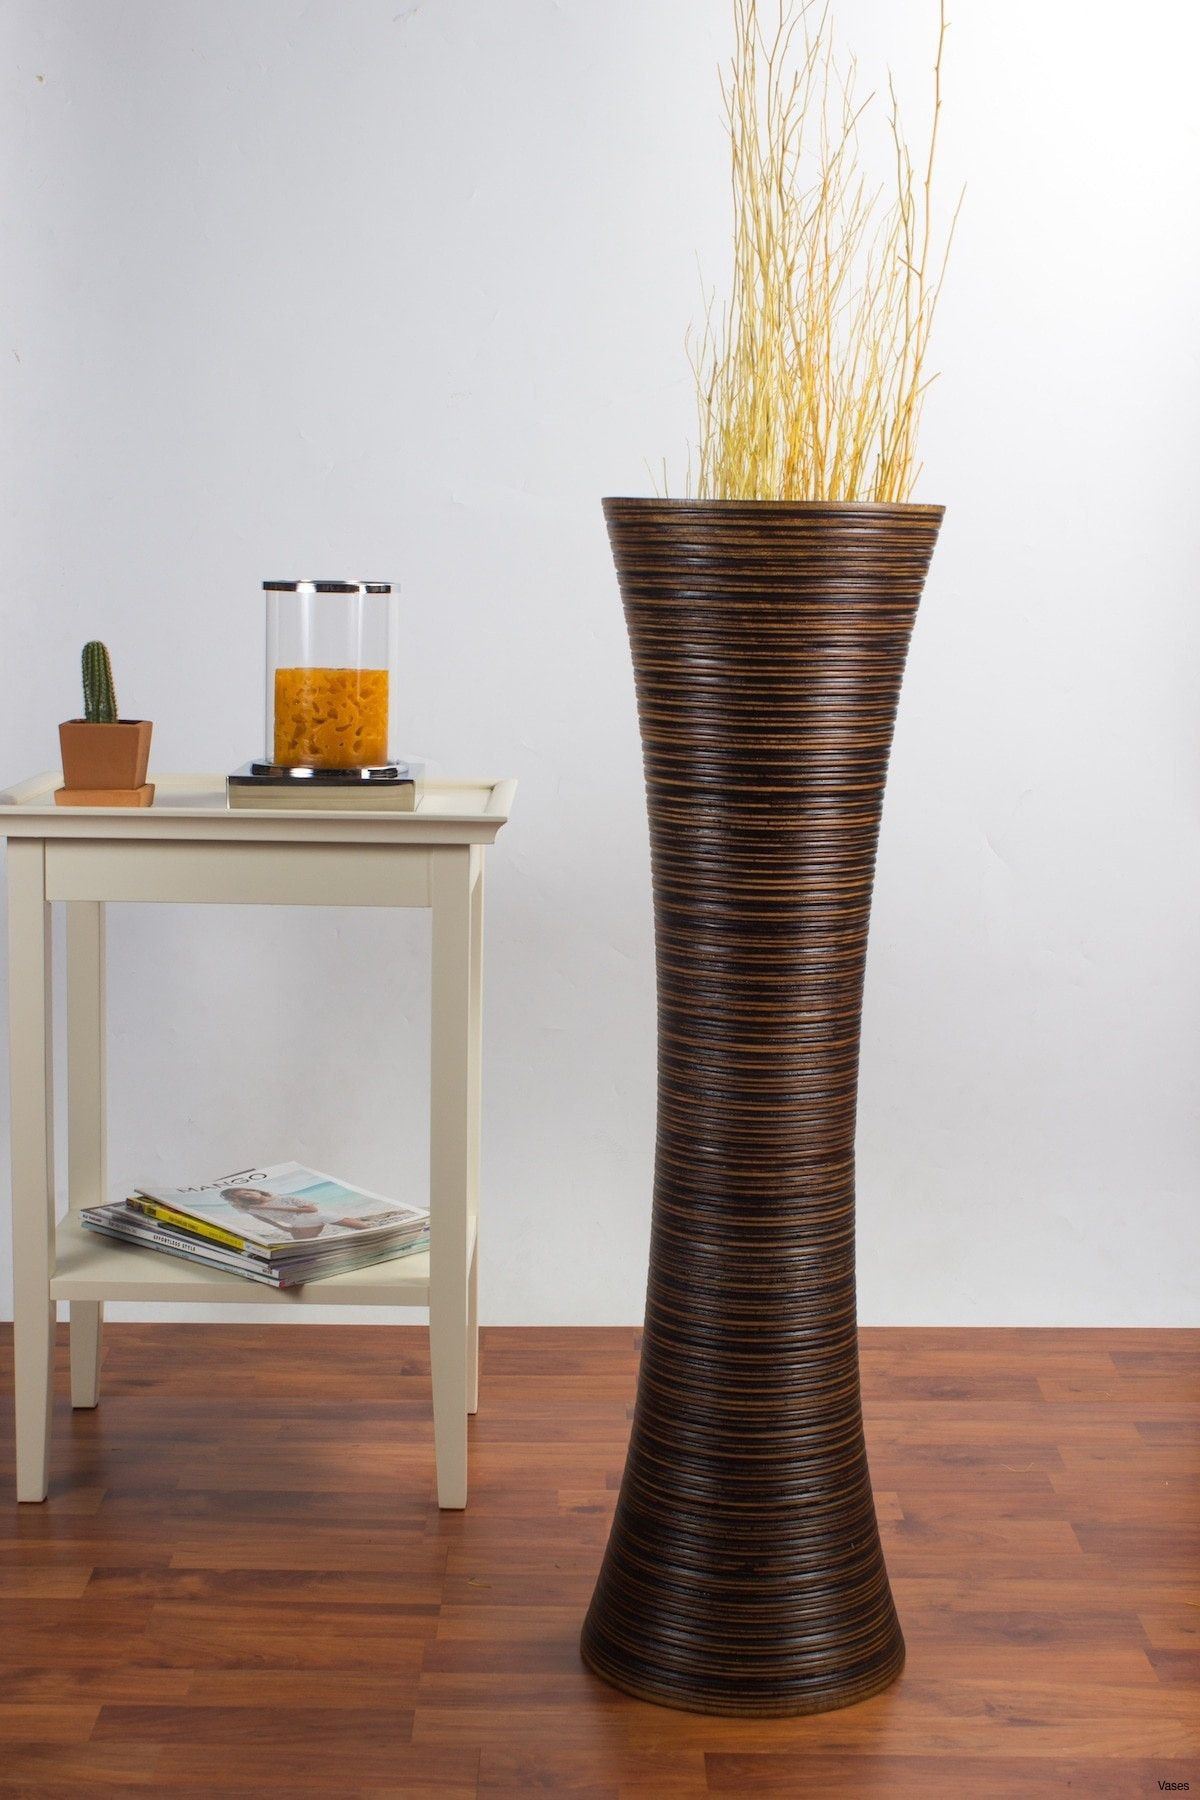 27 Lovable Decorative Wood Vase 2024 free download decorative wood vase of tall decorative vases luxury decorative floor vases fresh d dkbrw with tall decorative vases luxury decorative floor vases fresh d dkbrw 5749 1h vases tall brown i